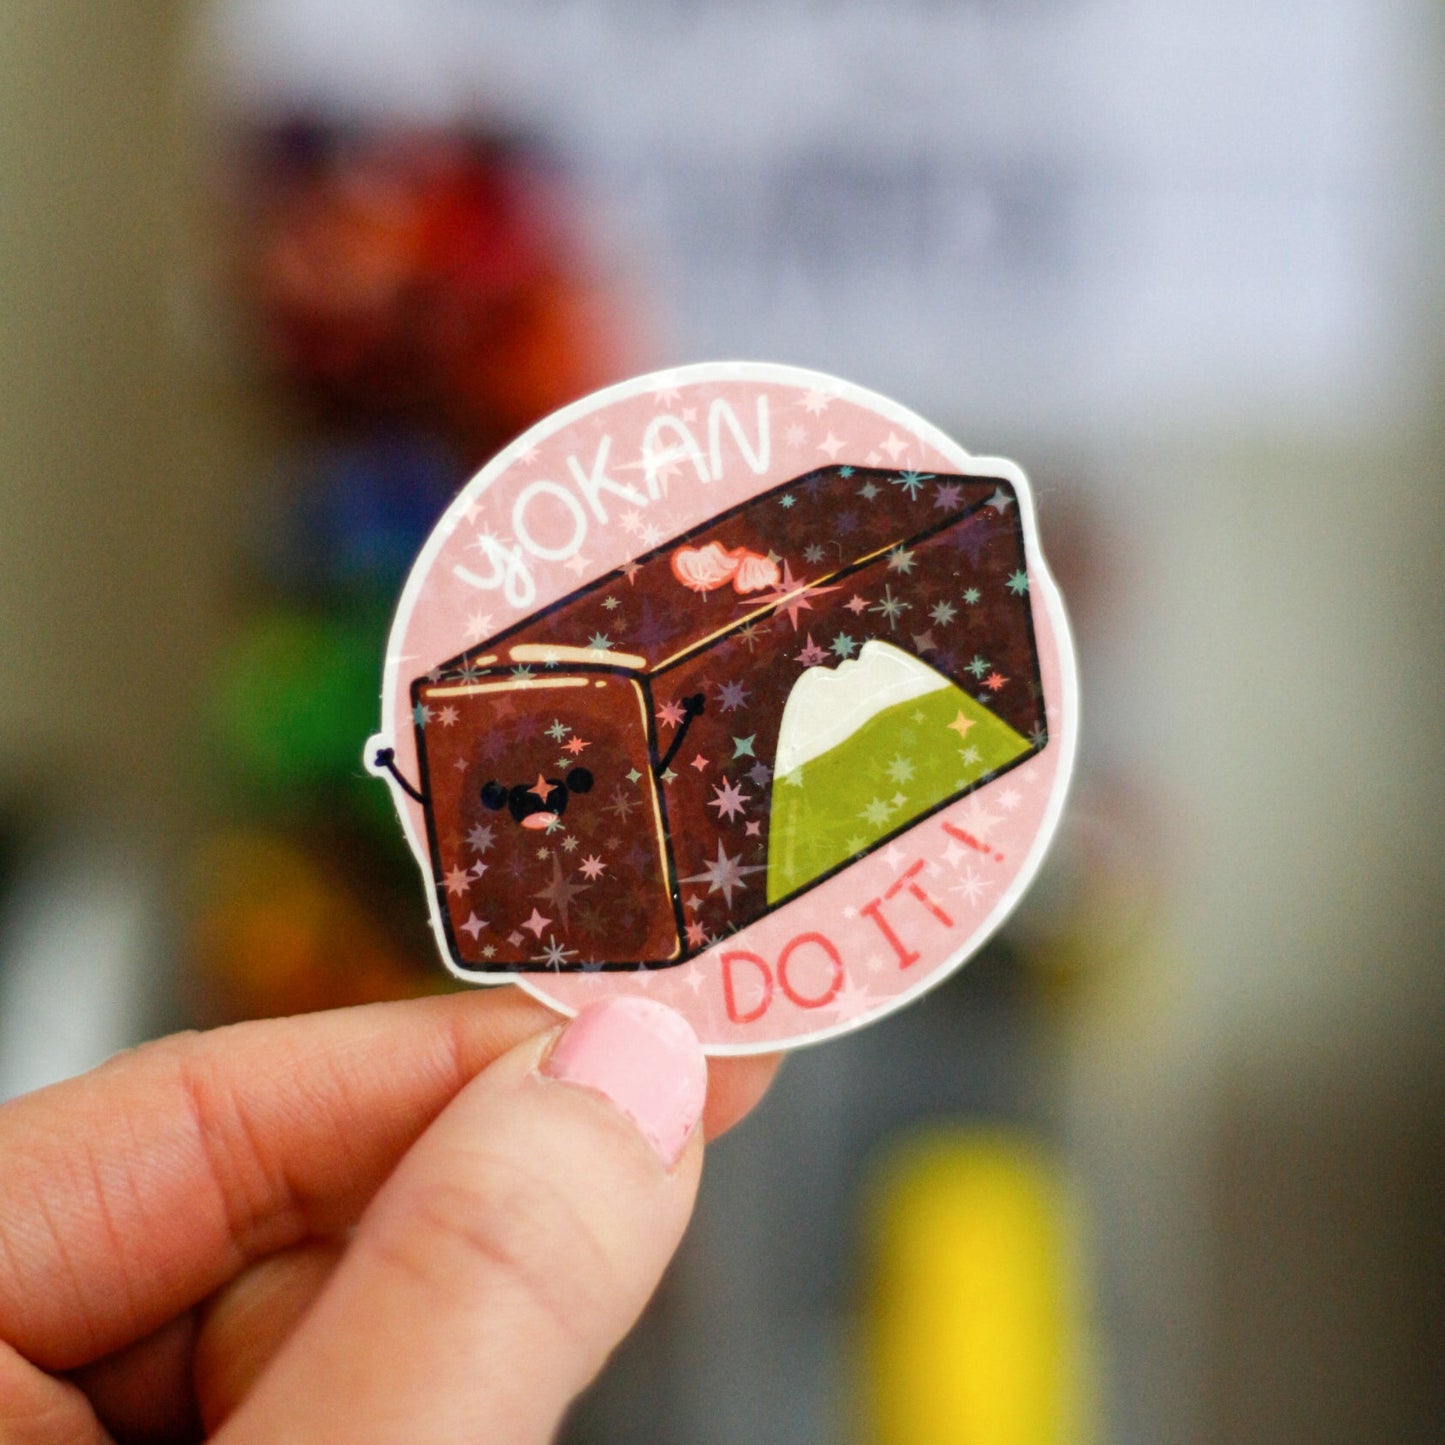 Yokan Do It - Holographic motivational stickers